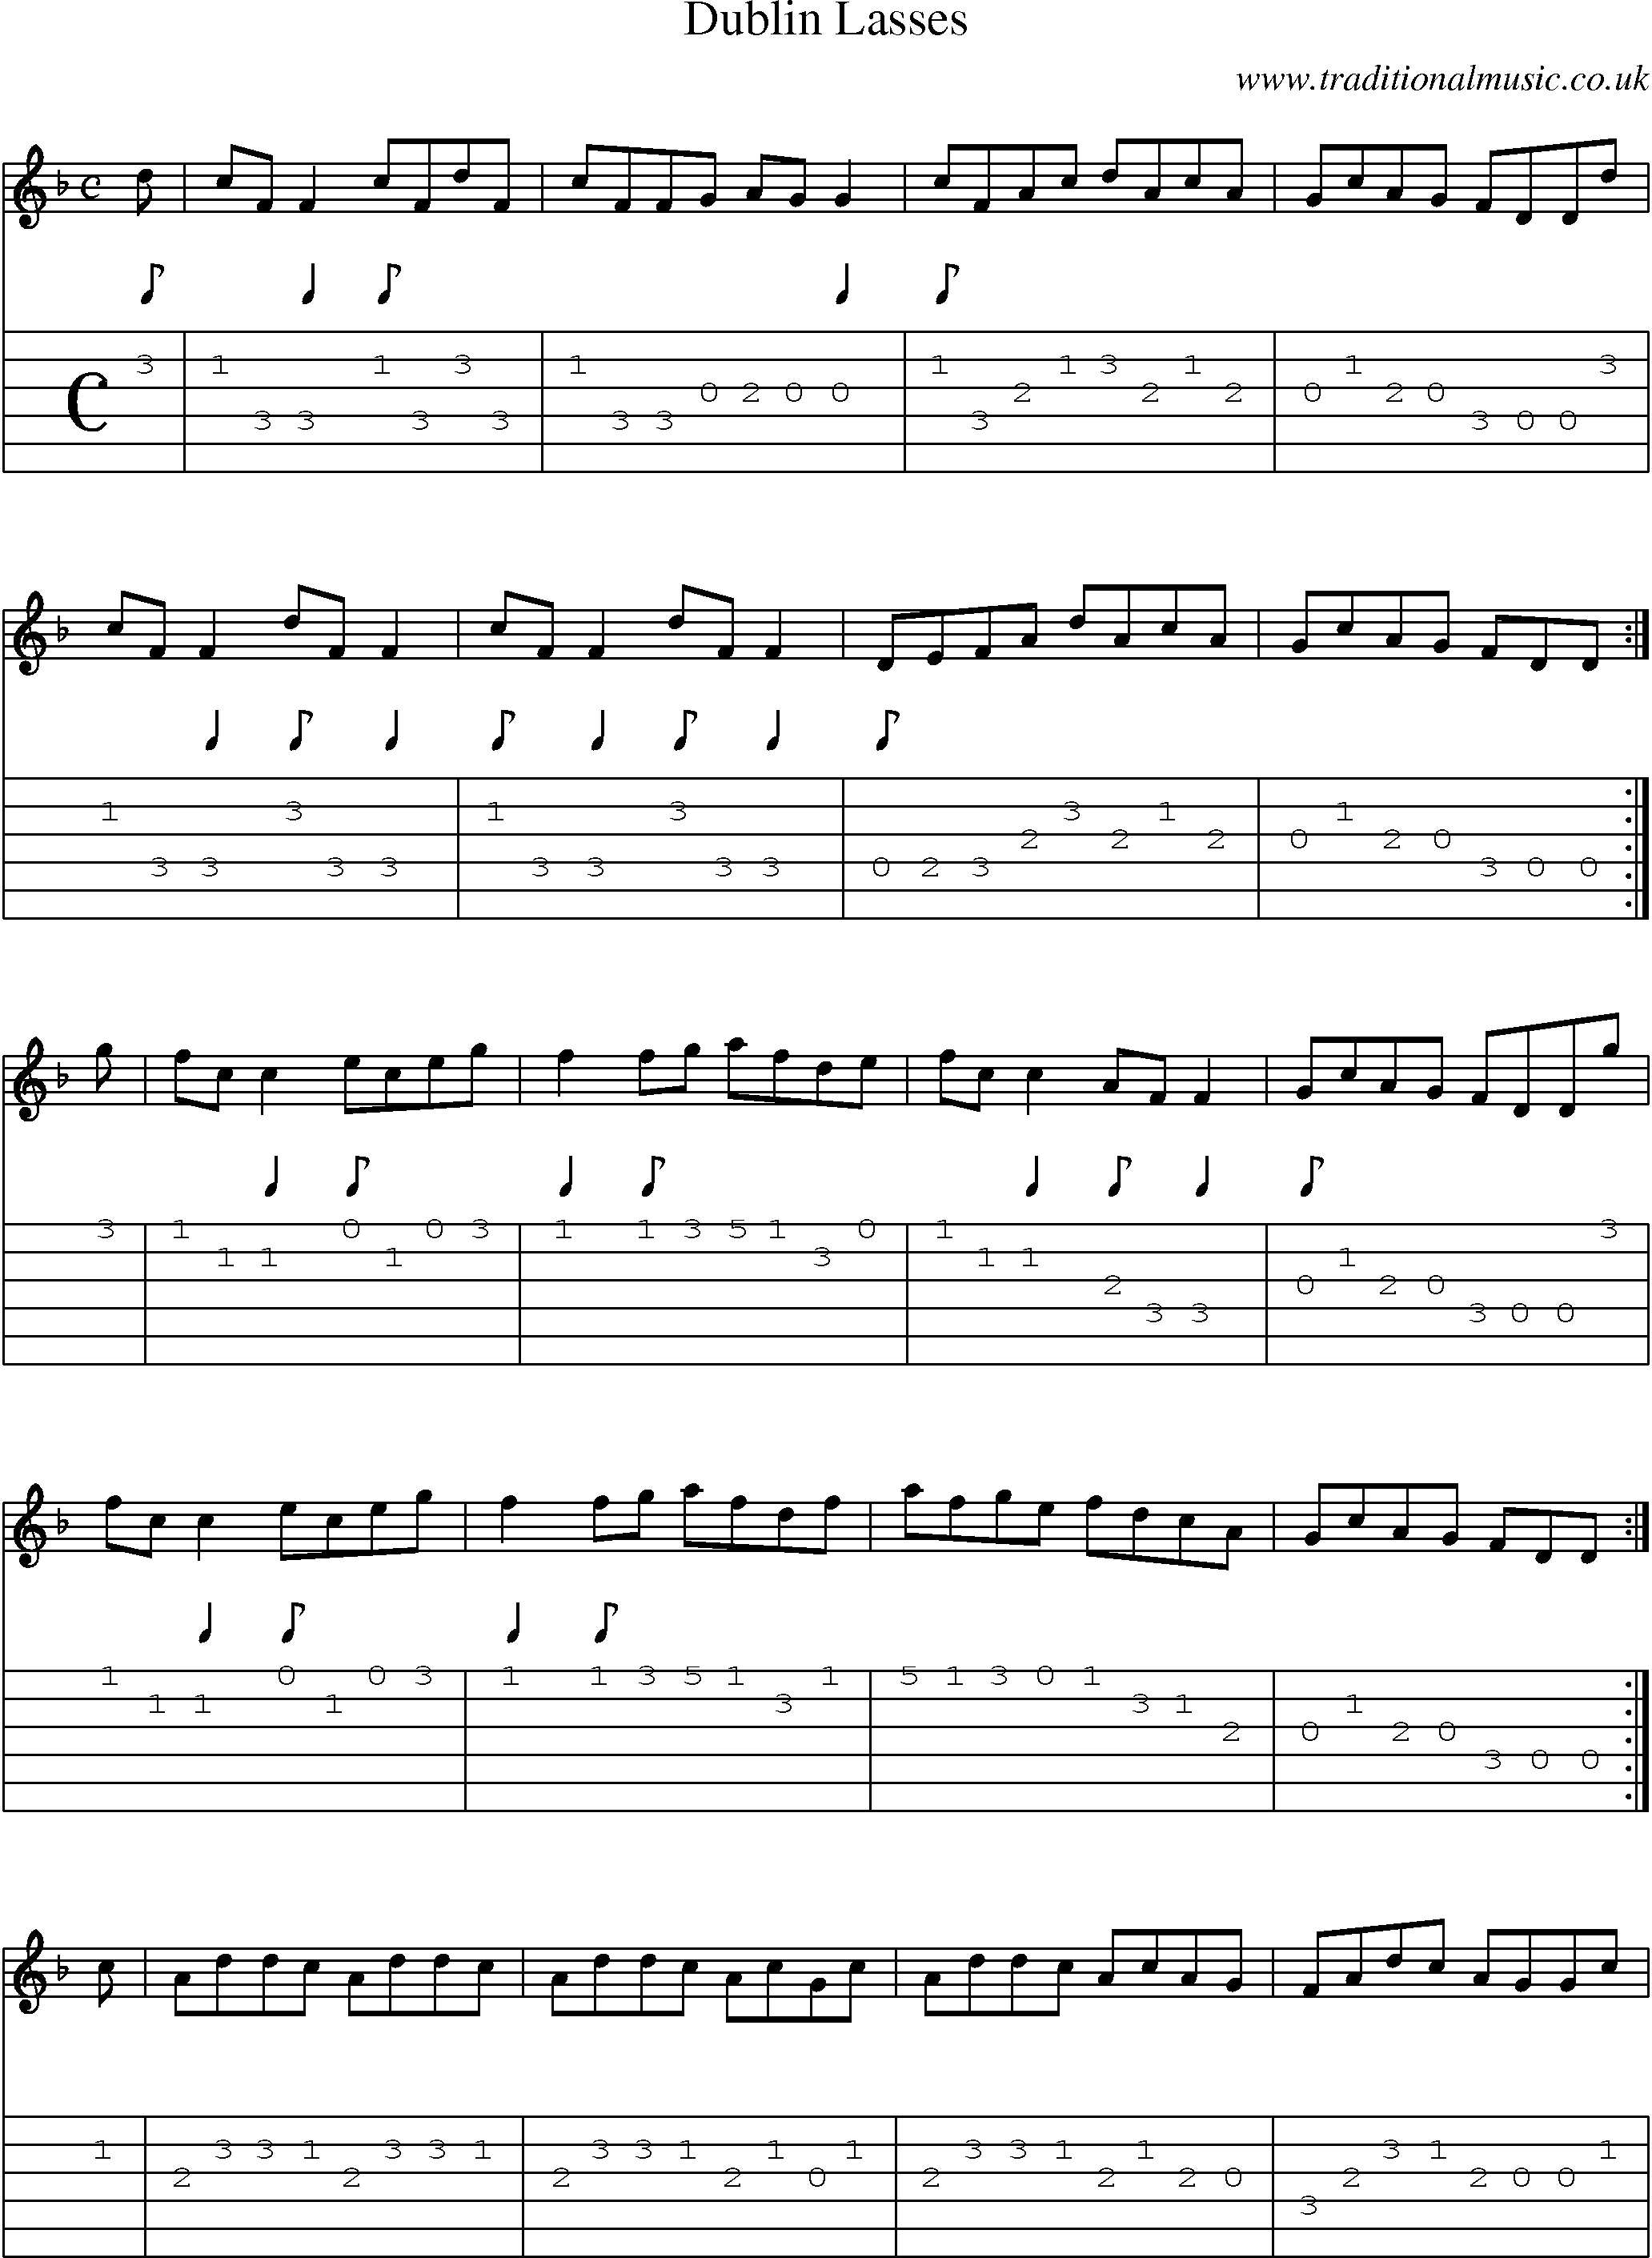 Music Score and Guitar Tabs for Dublin Lasses